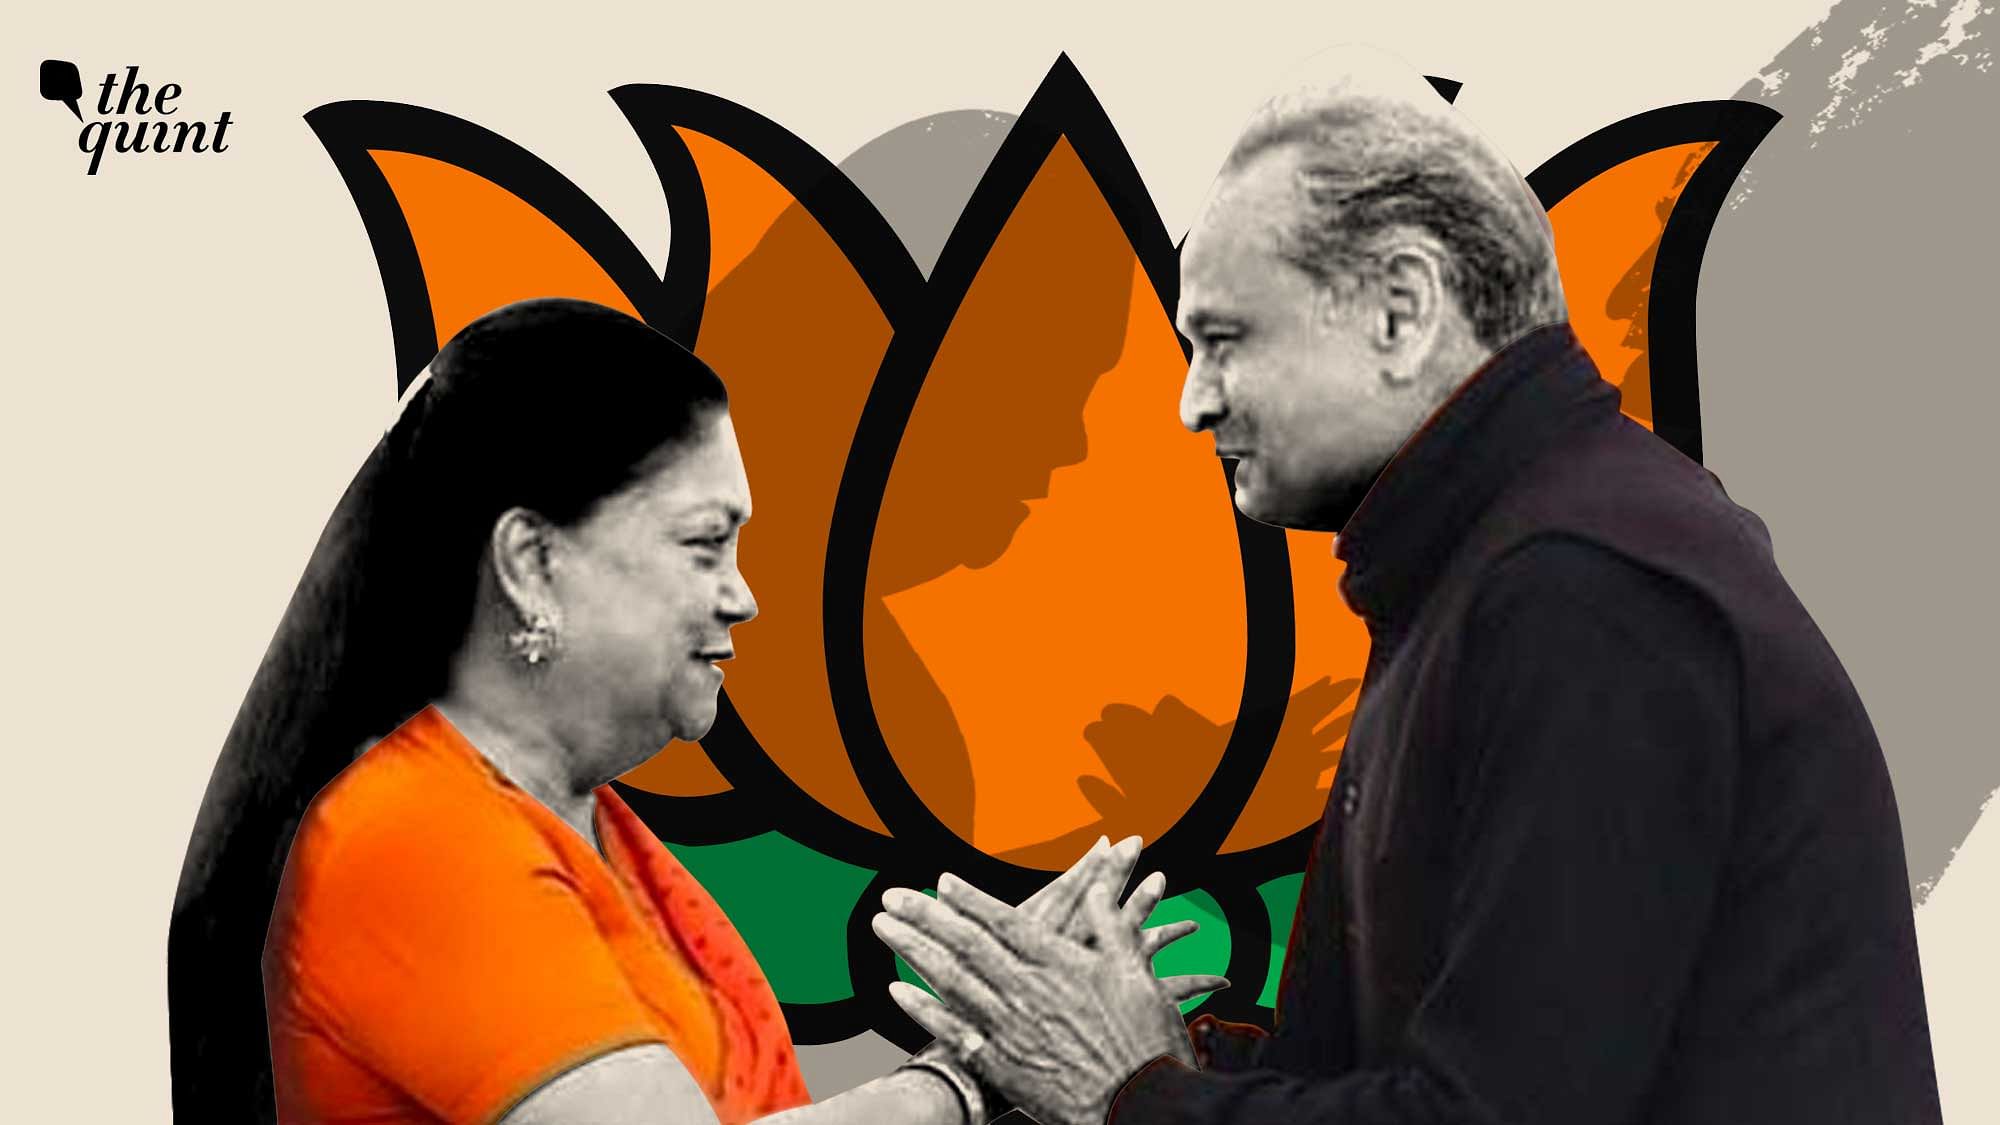 <div class="paragraphs"><p>The Gehlot-Raje era in Rajasthan politics is a complex tapestry of achievements and shortcomings. While their administrations brought undeniable progress, they have also left behind a legacy of missed opportunities.</p></div>